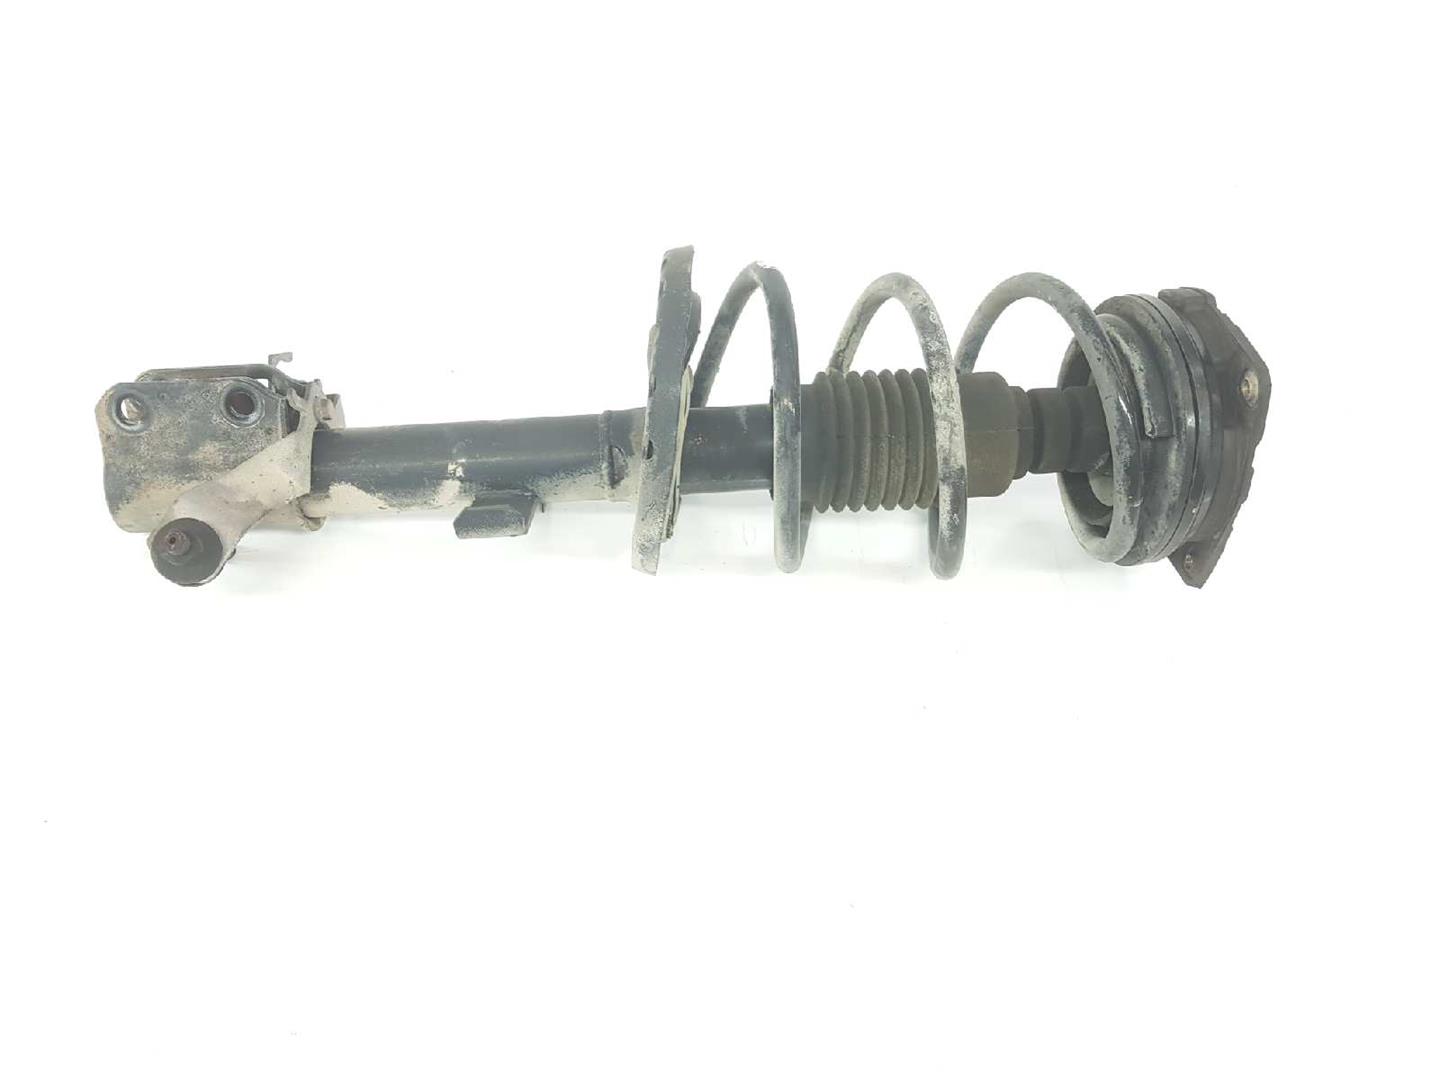 RENAULT Clio 3 generation (2005-2012) Front Right Shock Absorber 8200676026, 8200676026 19758655